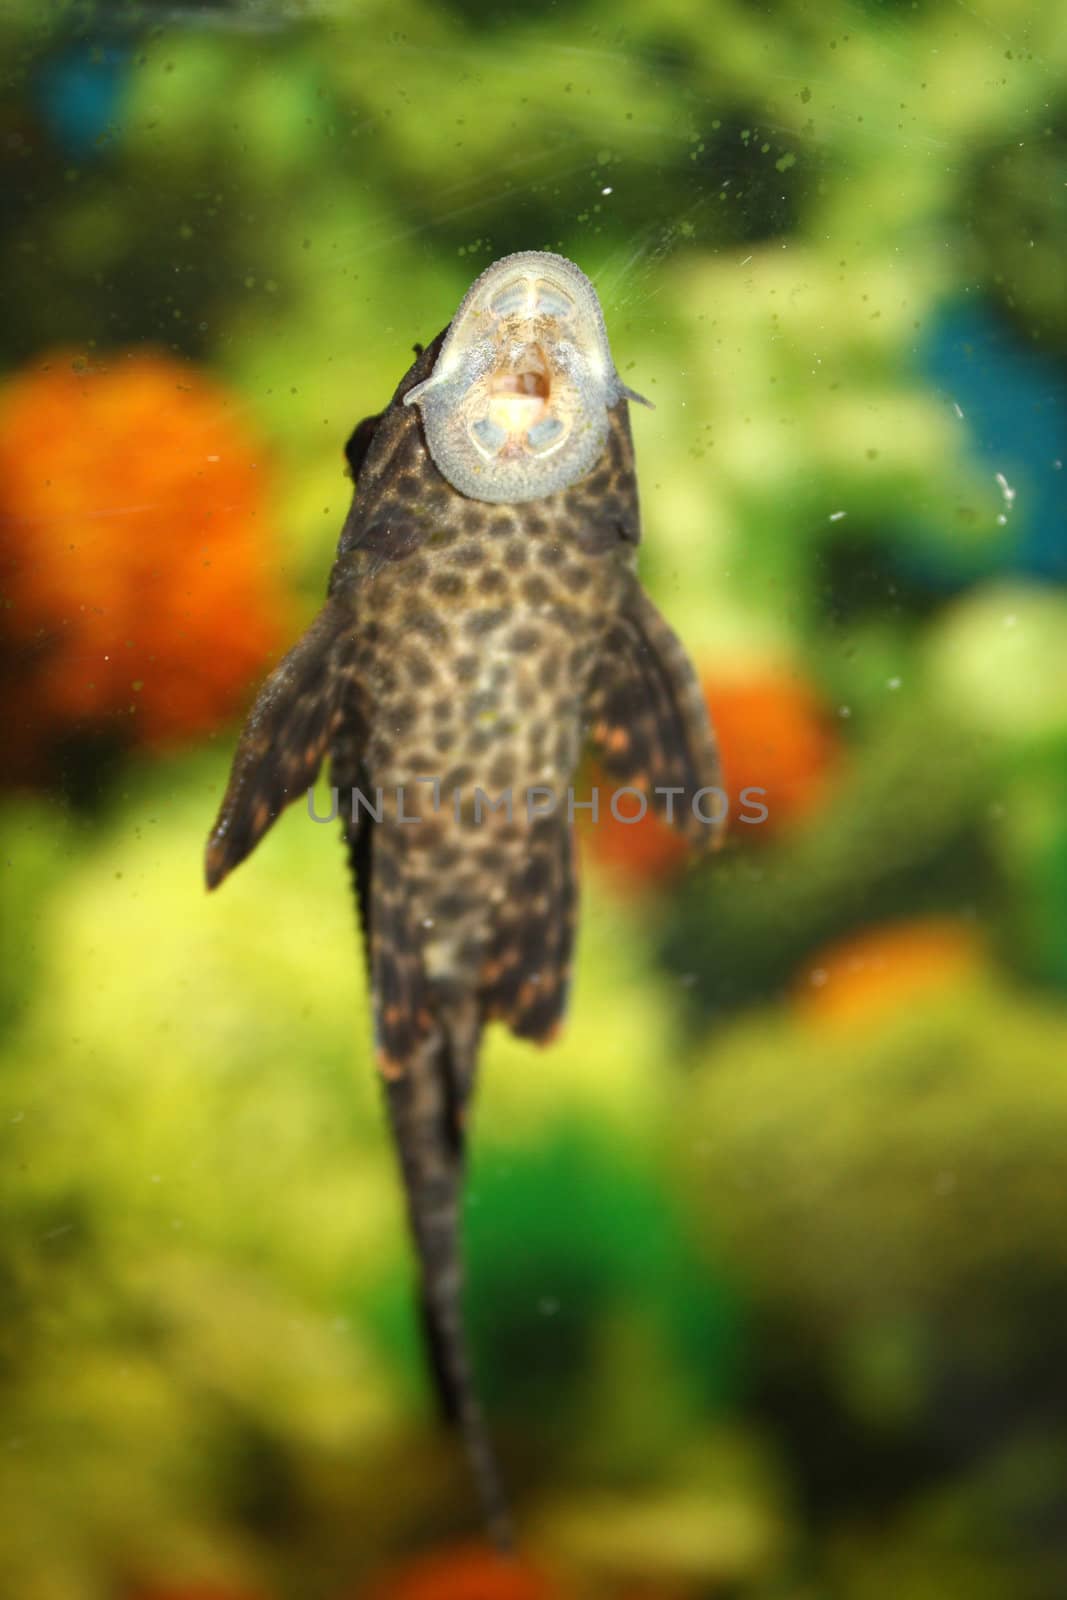 A closeup view of a sucker-fish species found in the Indian tropical coast, sucking the surface of the glass of an aquarium. Focus on mouth.